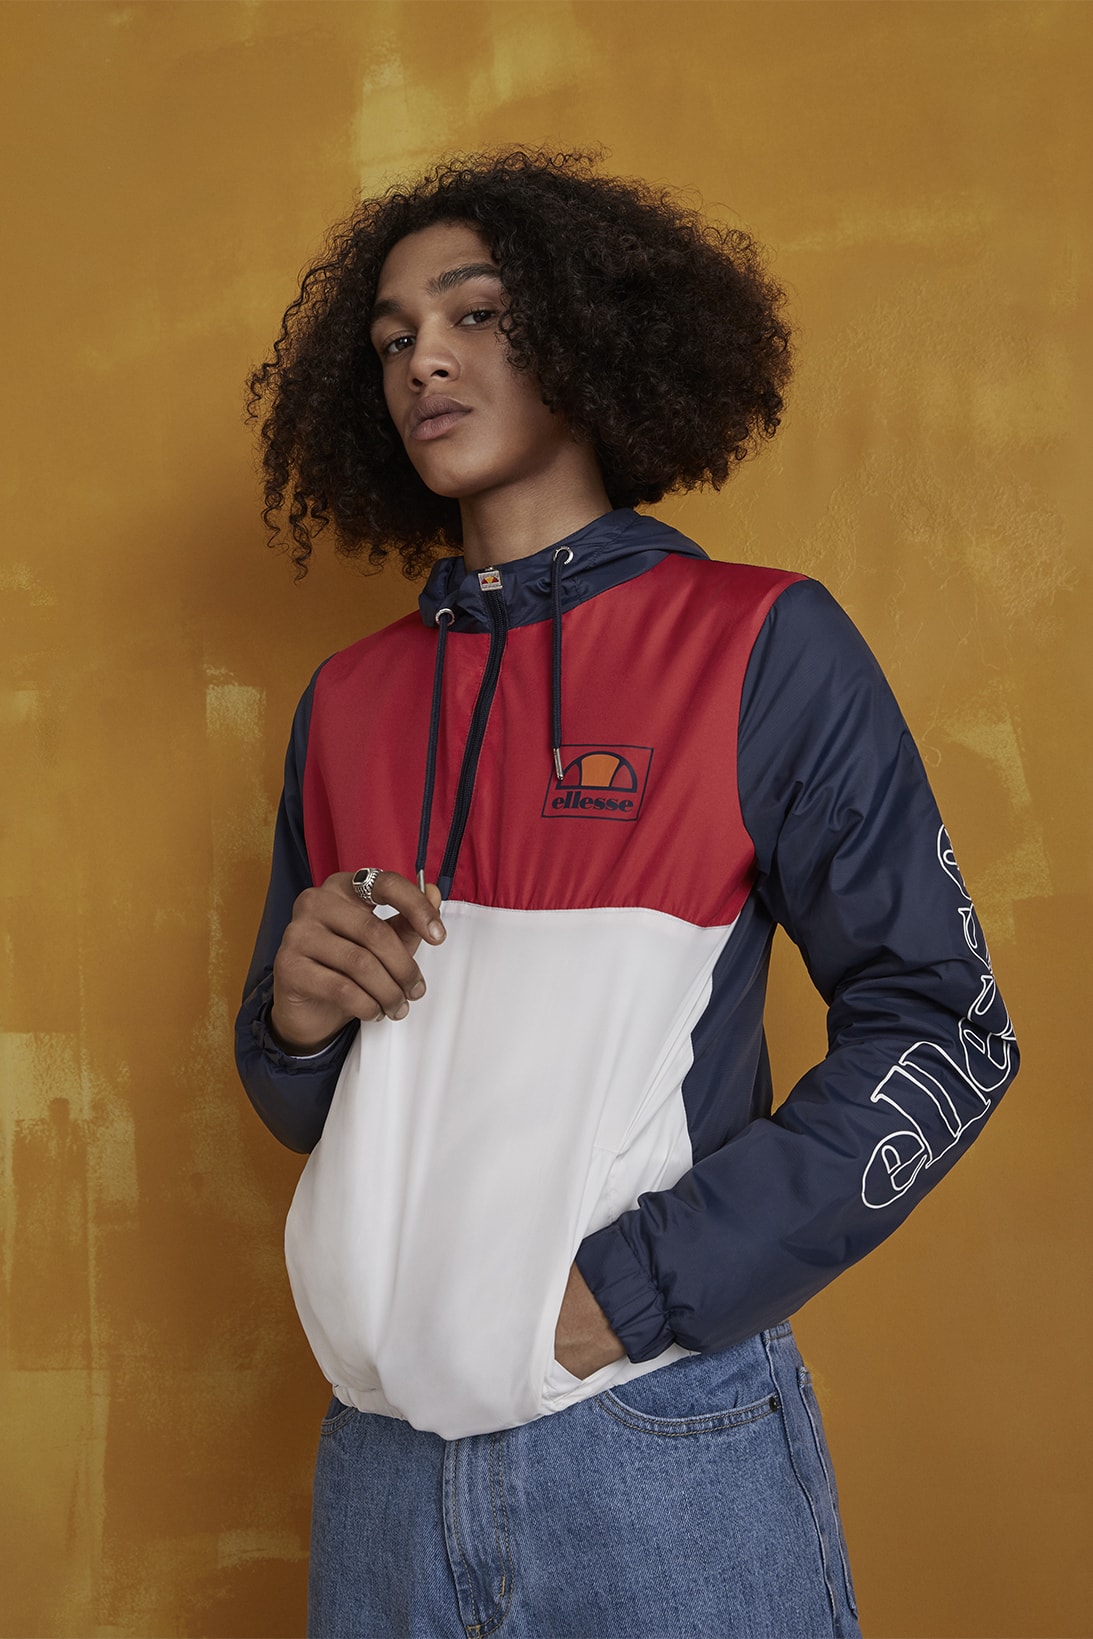 A Guide to Ellesse's Menswear Revival